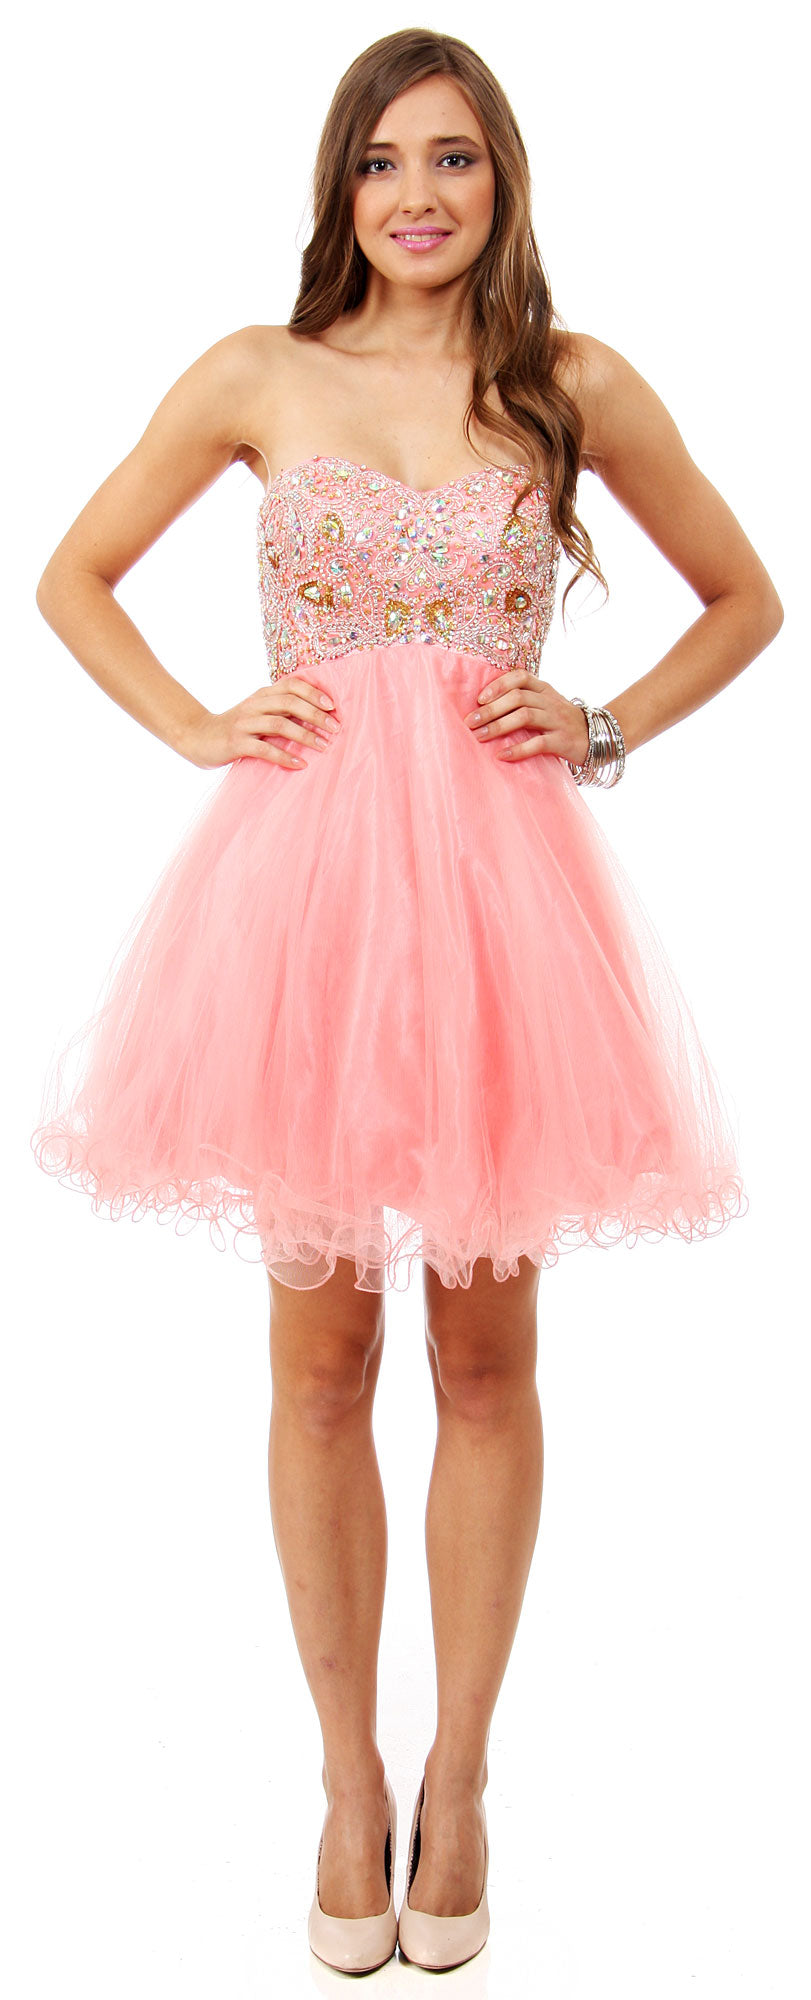 Main image of Strapless Beaded Bust Mesh Short Party Prom Dress